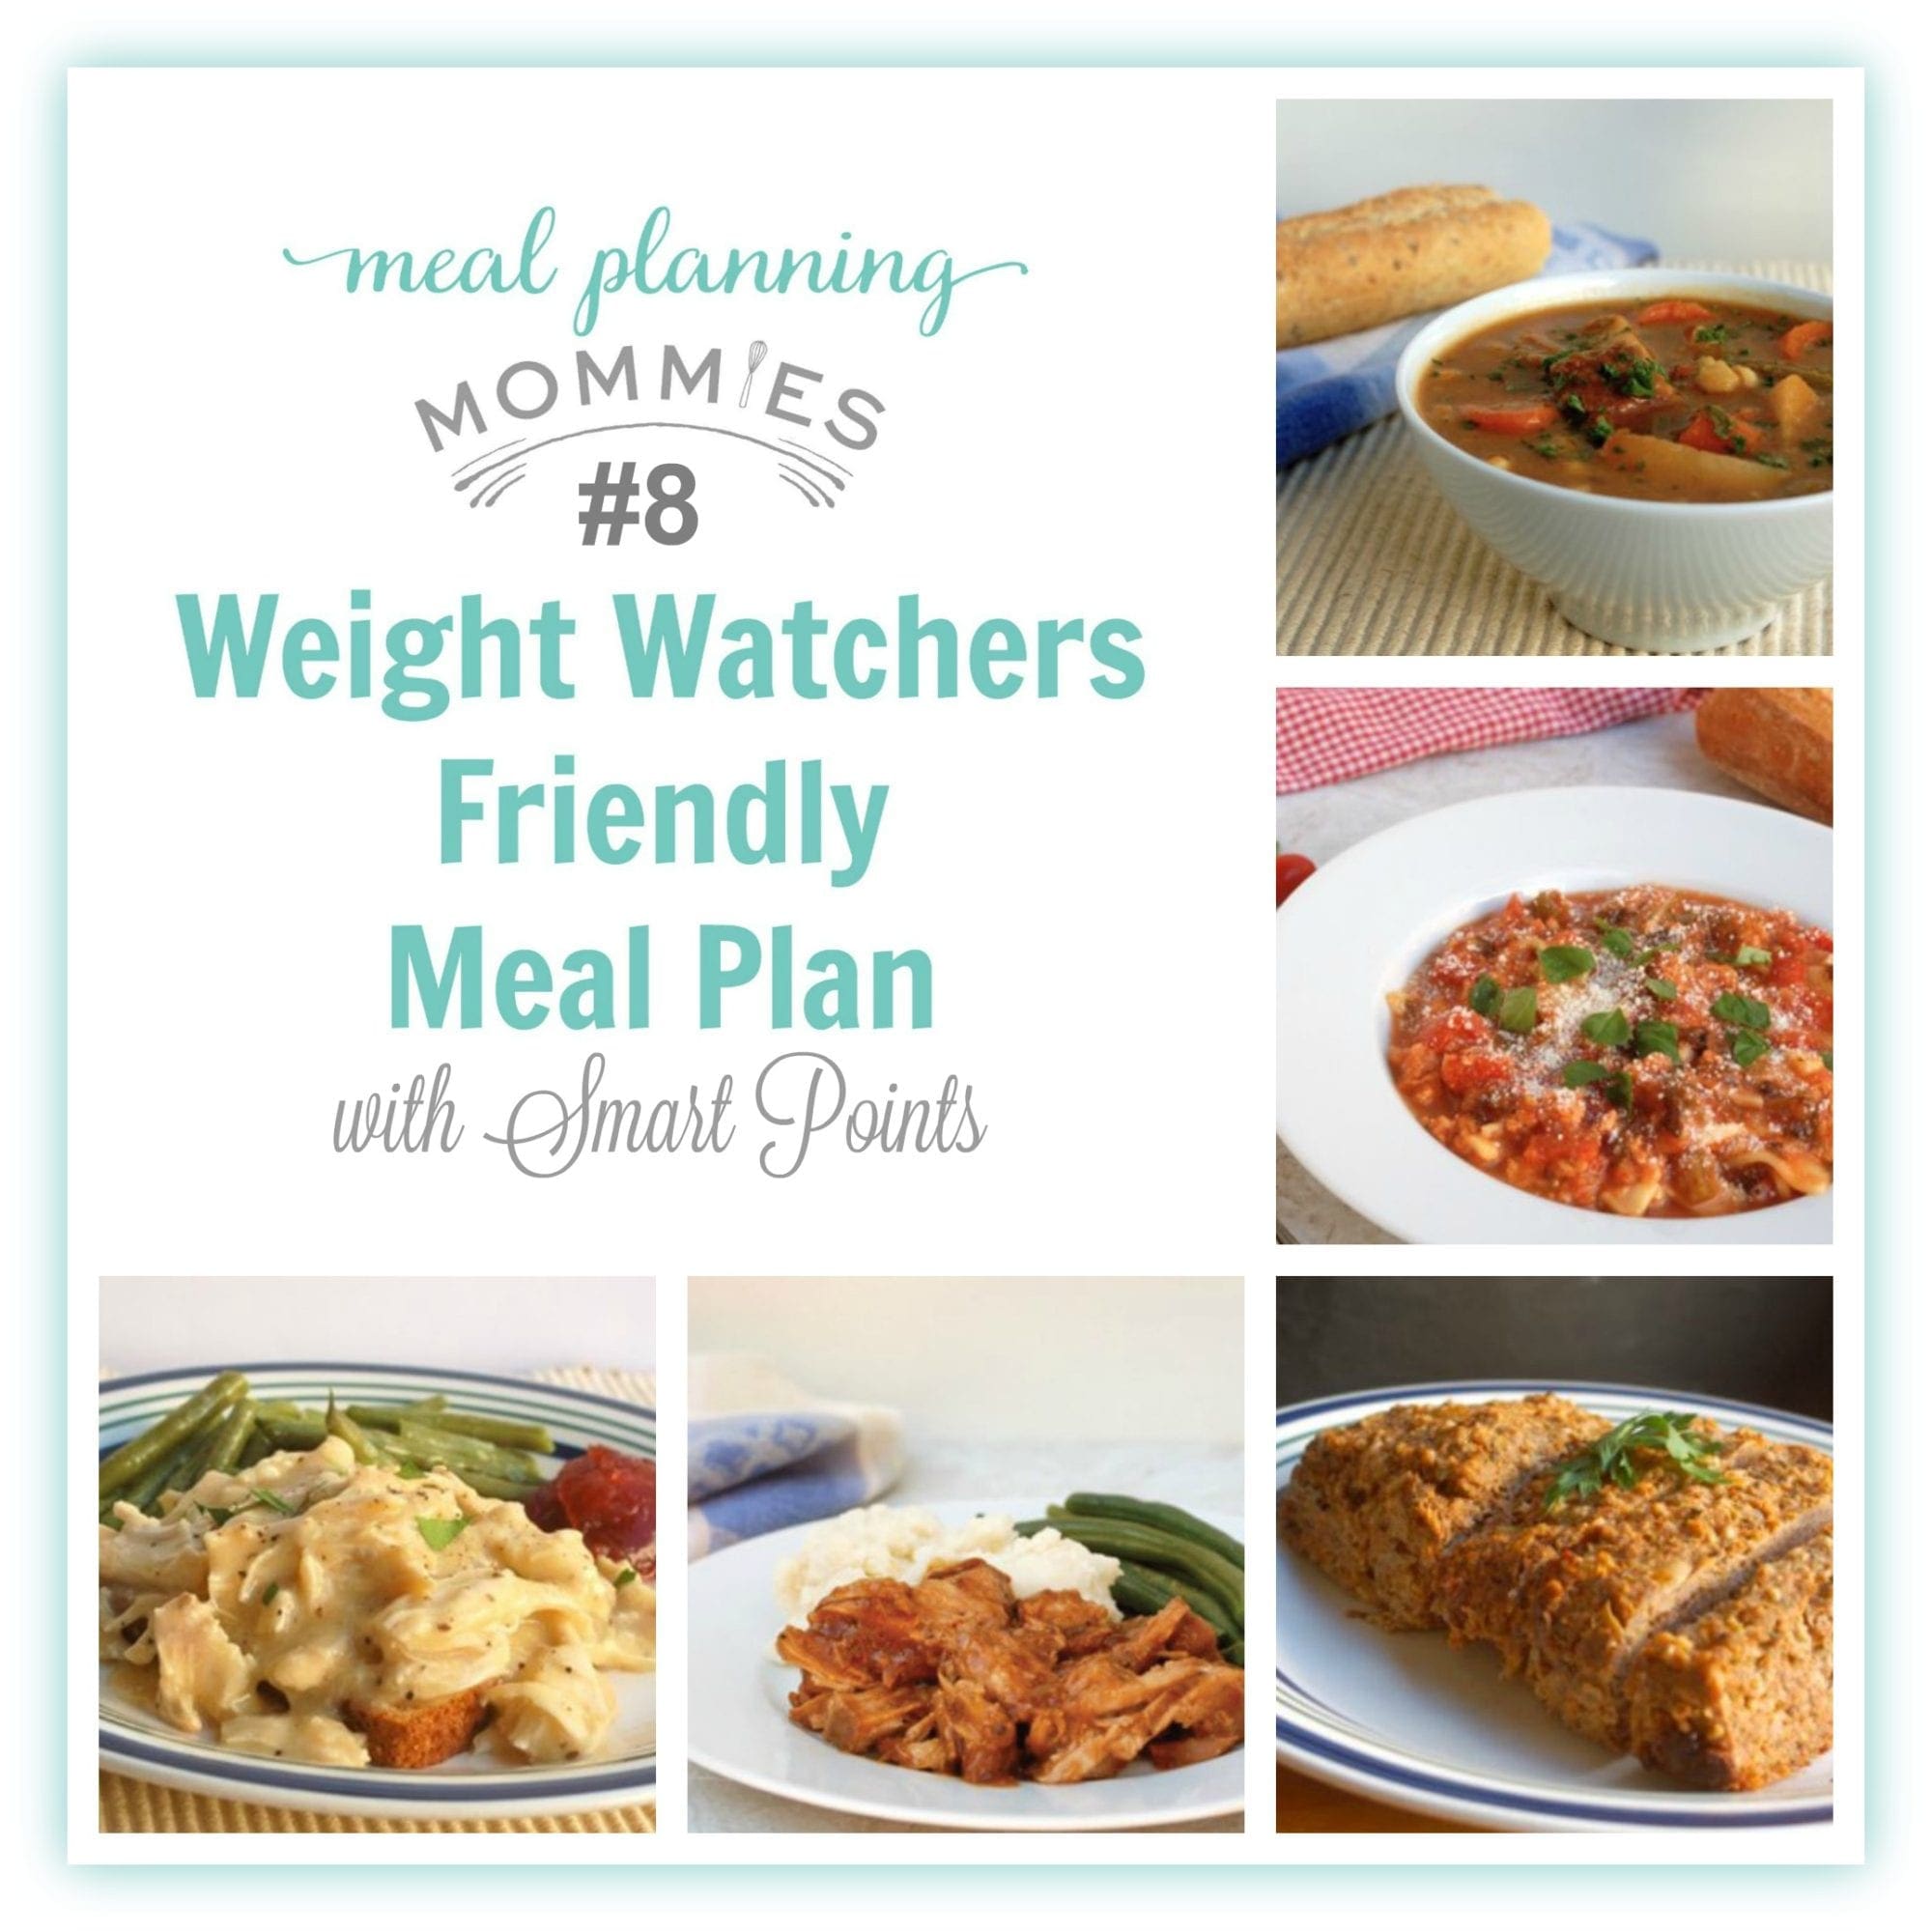 Weight Watcher Meal Plan pic- Meal Planning Mommies